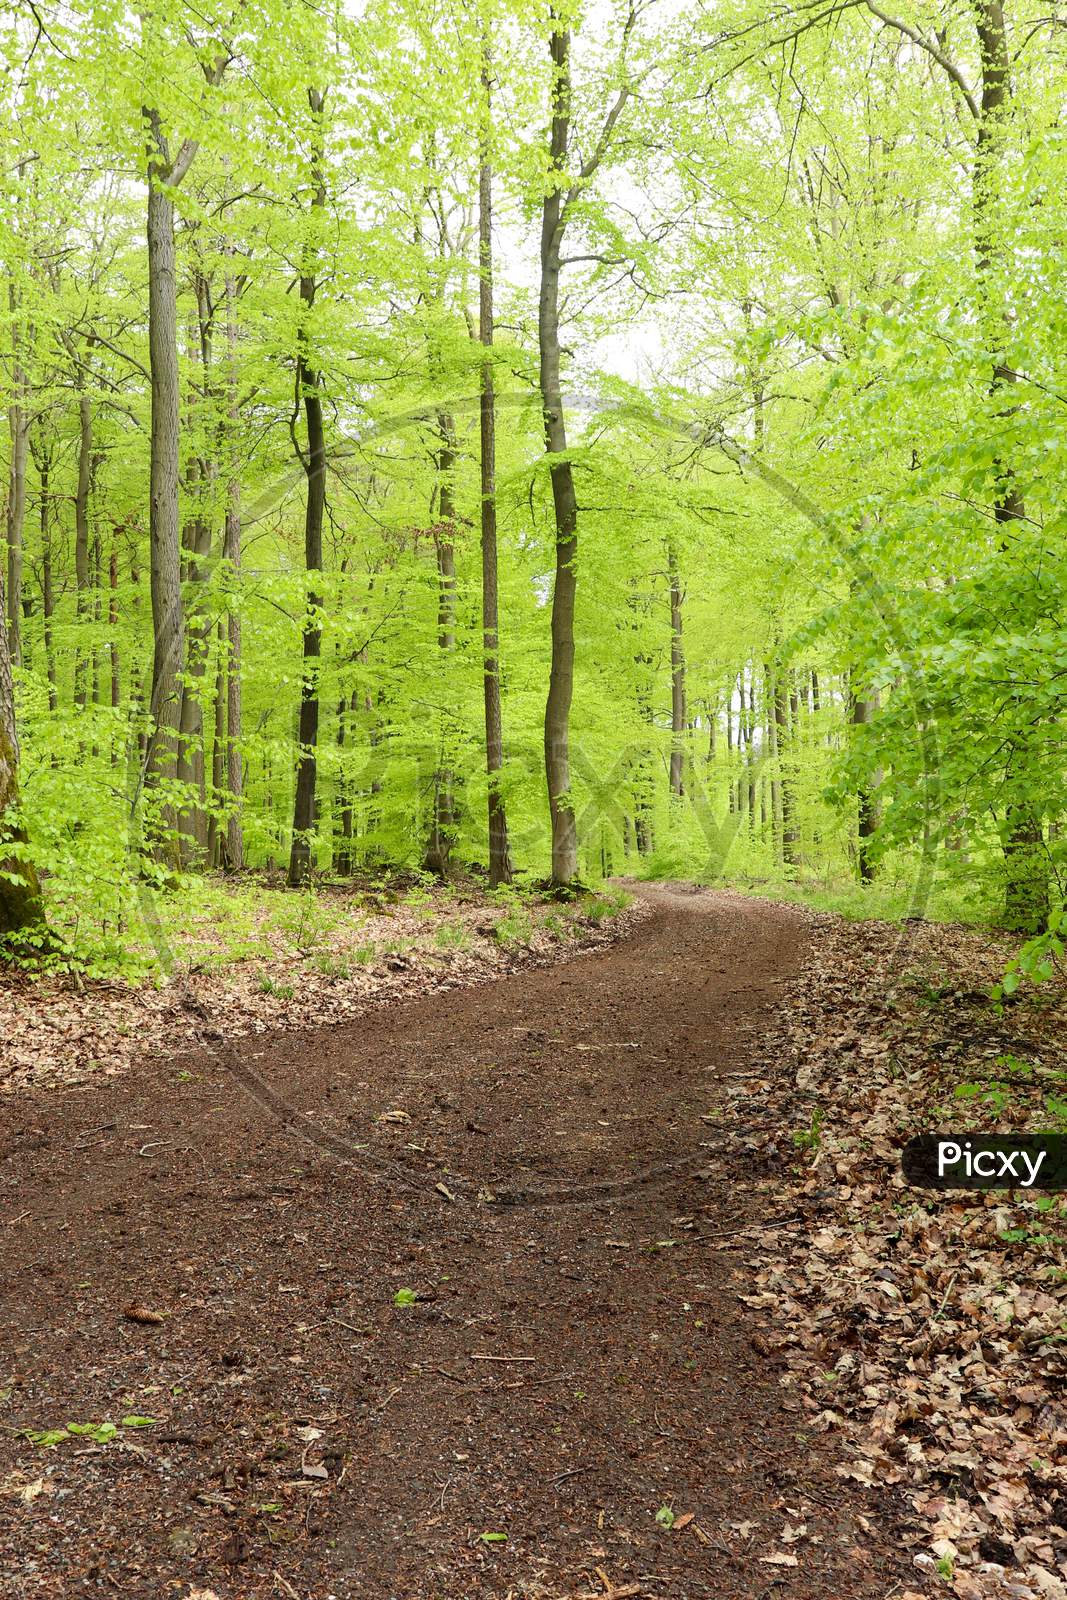 Path Leading Into The Palatinate Forest In Germany With Bright Green Tree Leaves In Early Spring.